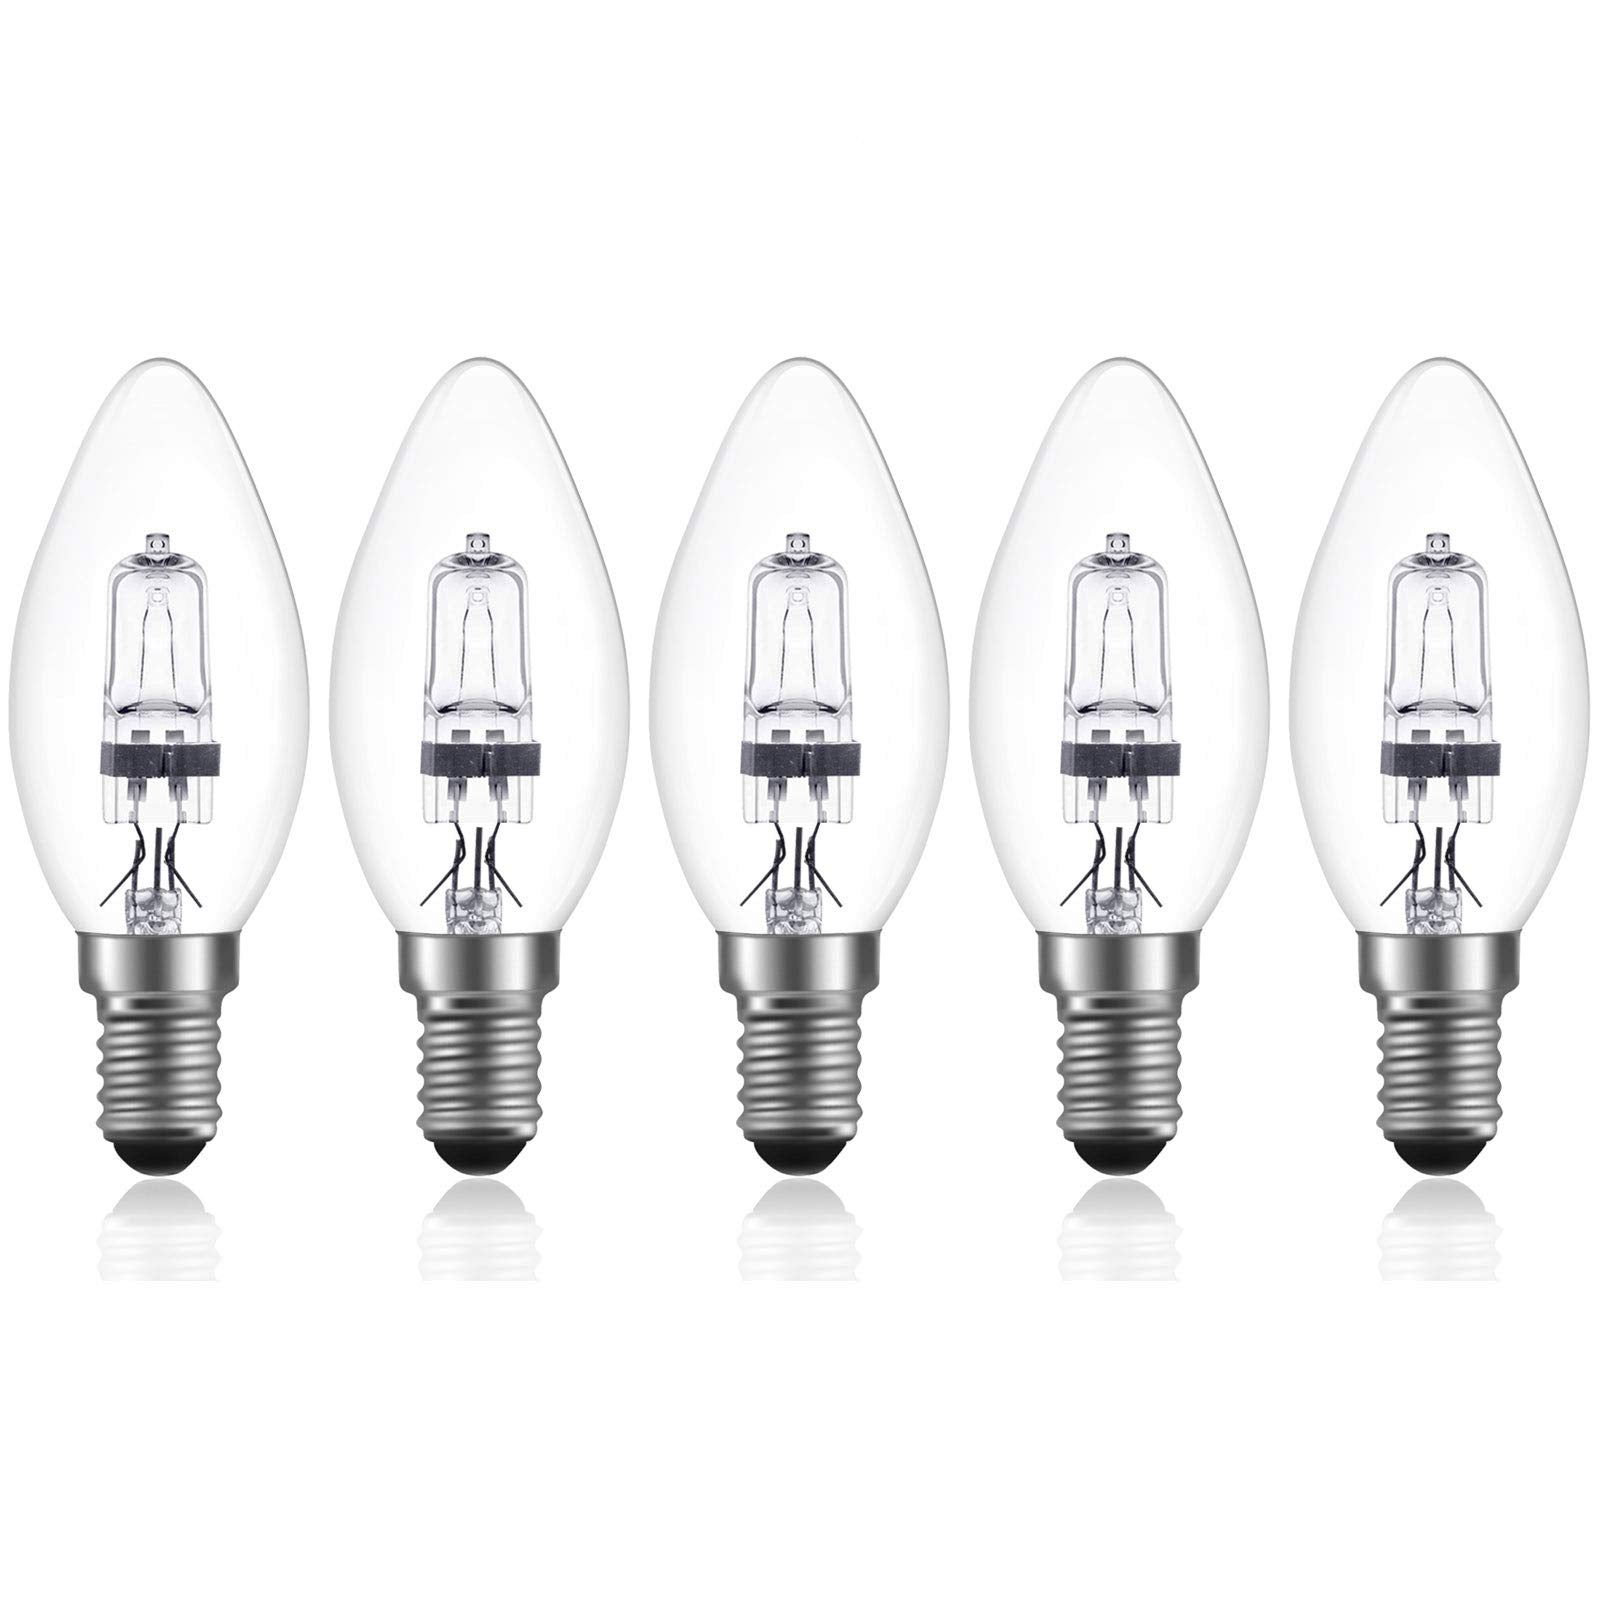 Doright Halogen Candles Light Bulbs, E14 Halogen 42w Bulb, Warm White 2700K,Screw in Light Bulbs, Dimmable Candle Bulbs,Pack of 5